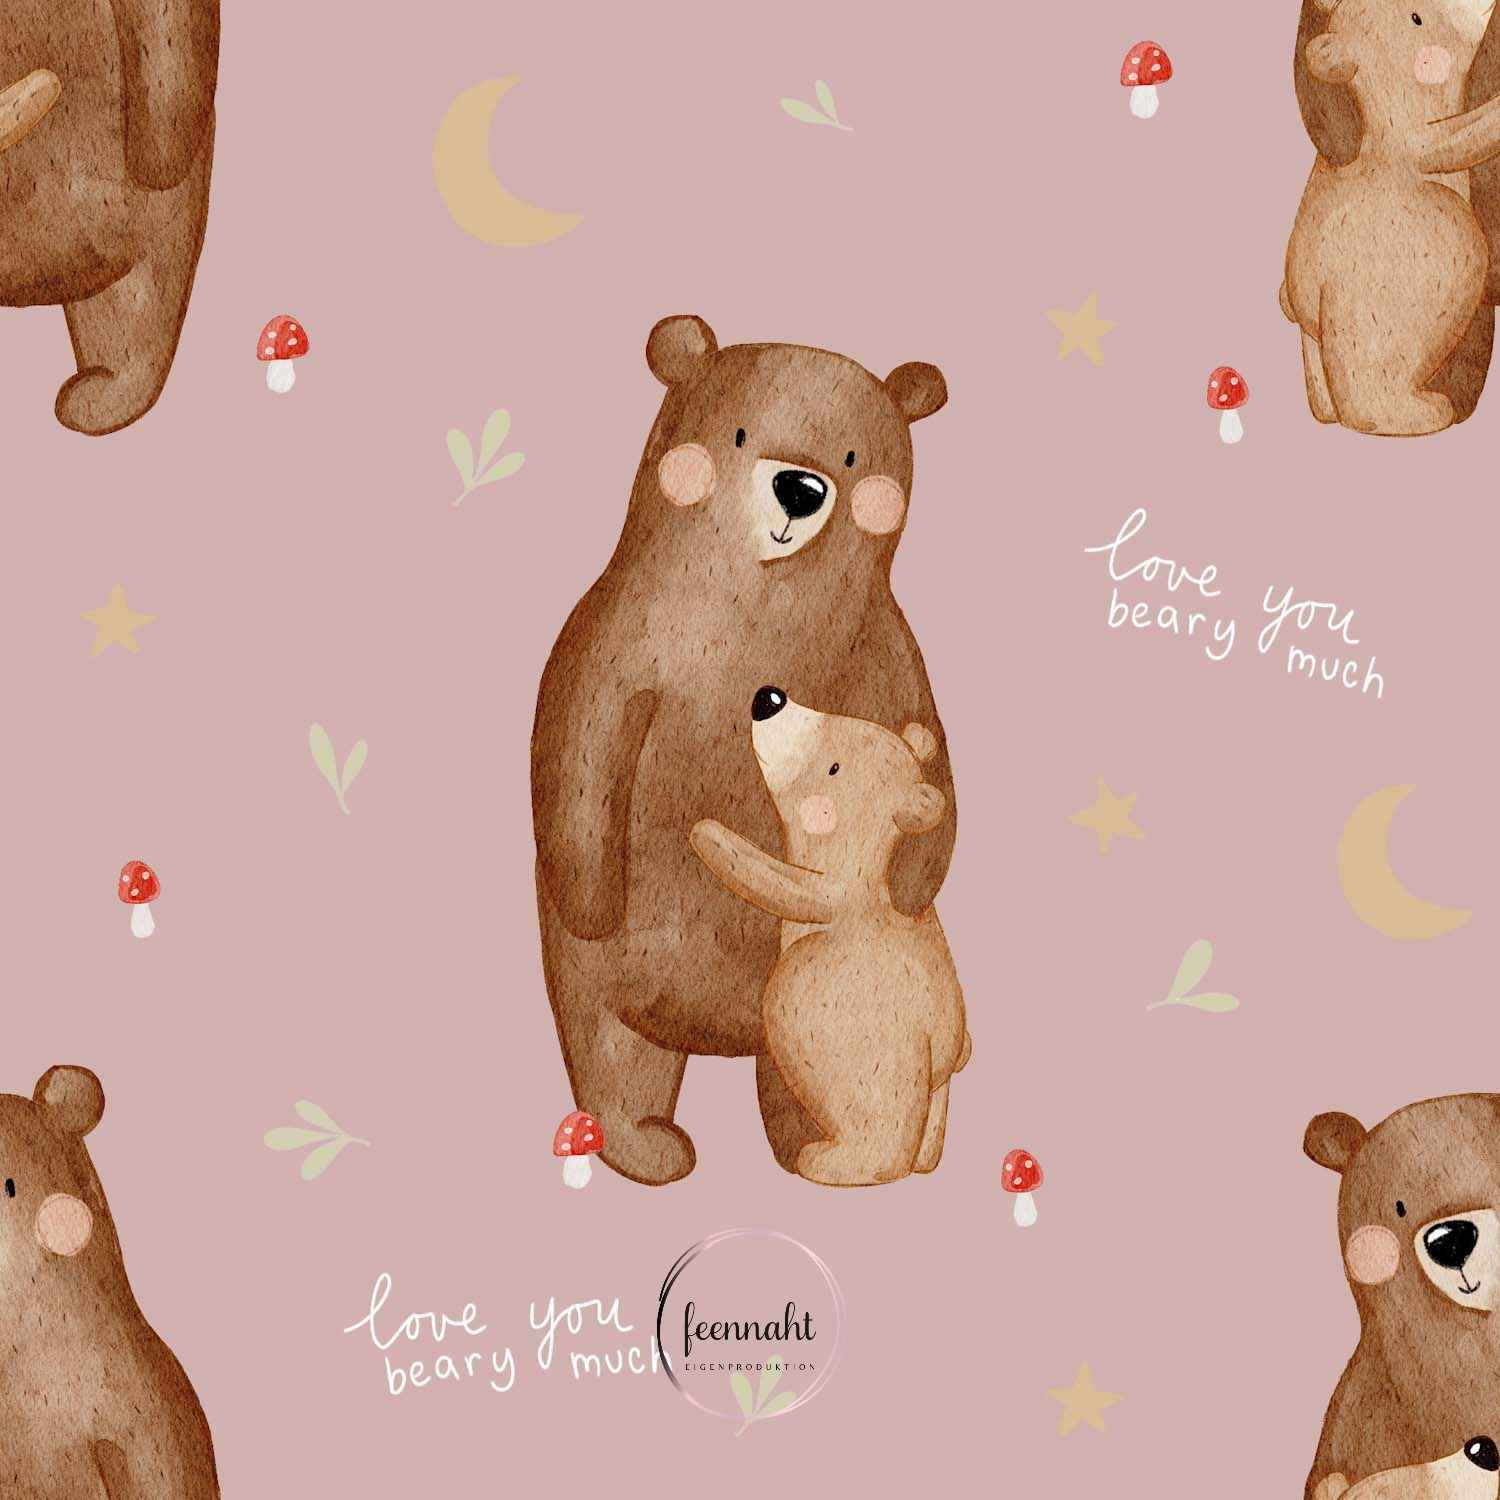 Vorbestellung - Jersey o. French Terry / 23,00 EUR/m - Eigenproduktion - I love you beary much